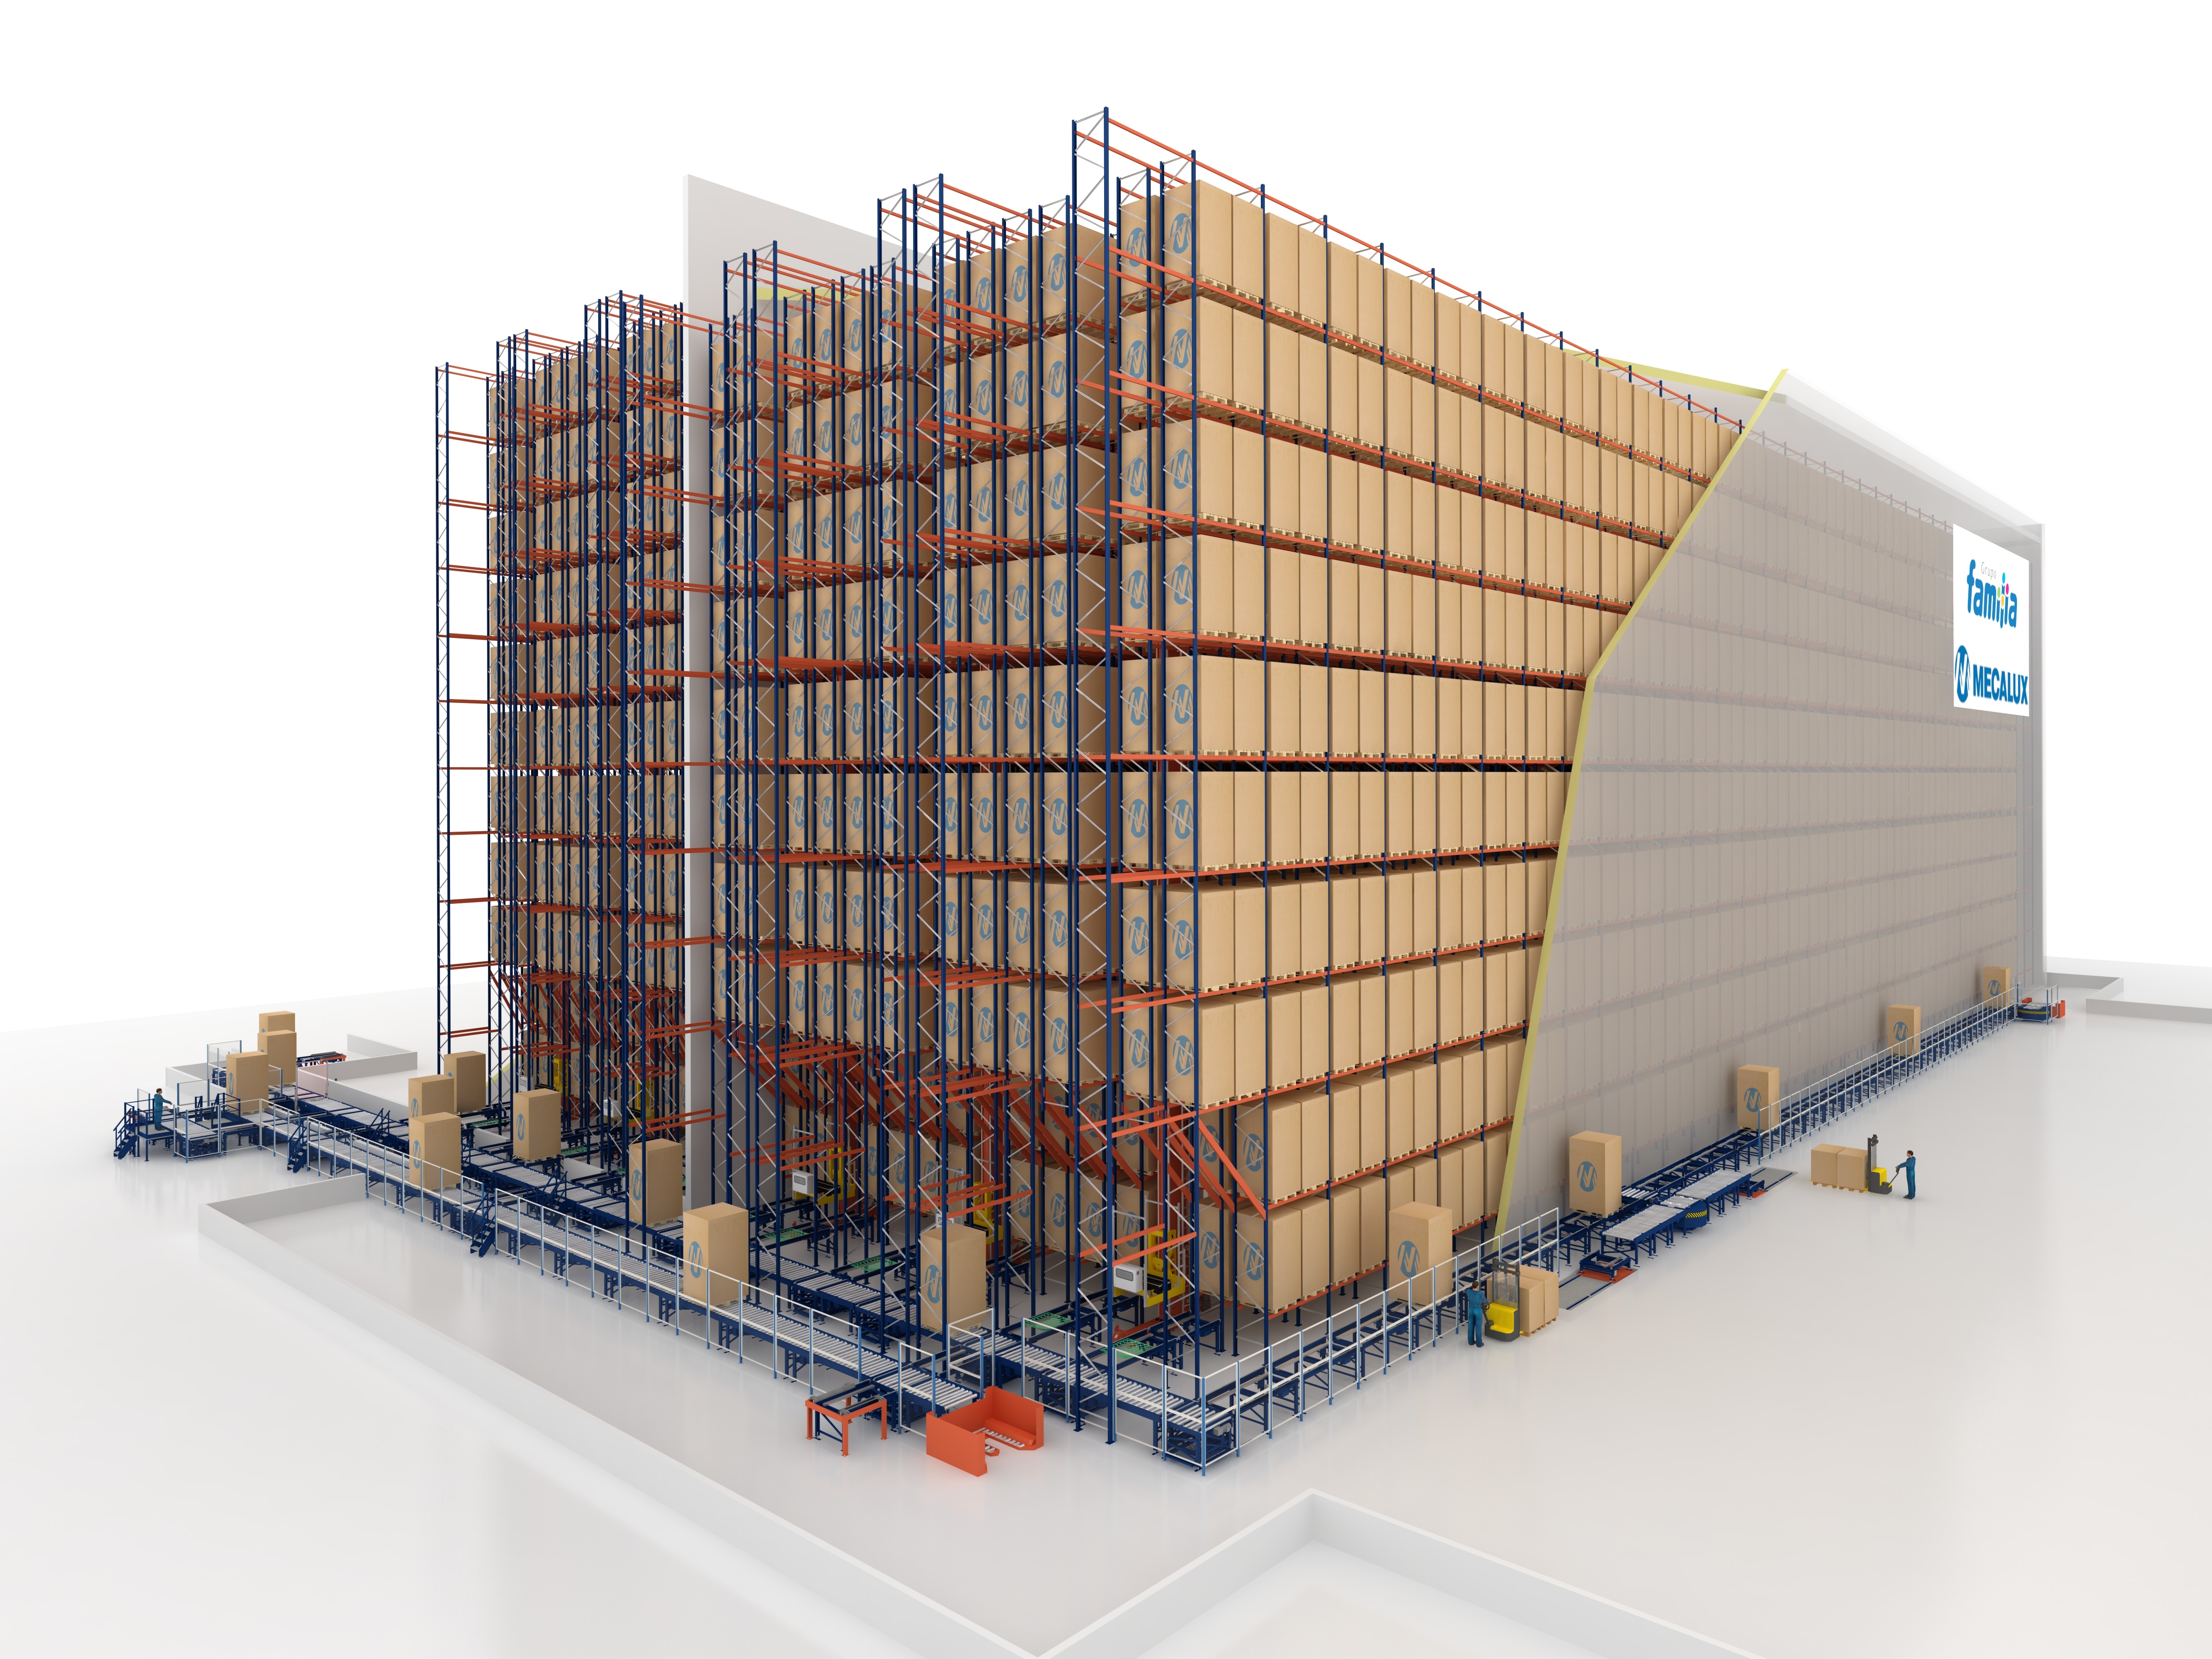 Grupo Familia warehouse can accommodate 19,000 pallets and workflows of 140 combined cycles per hour.